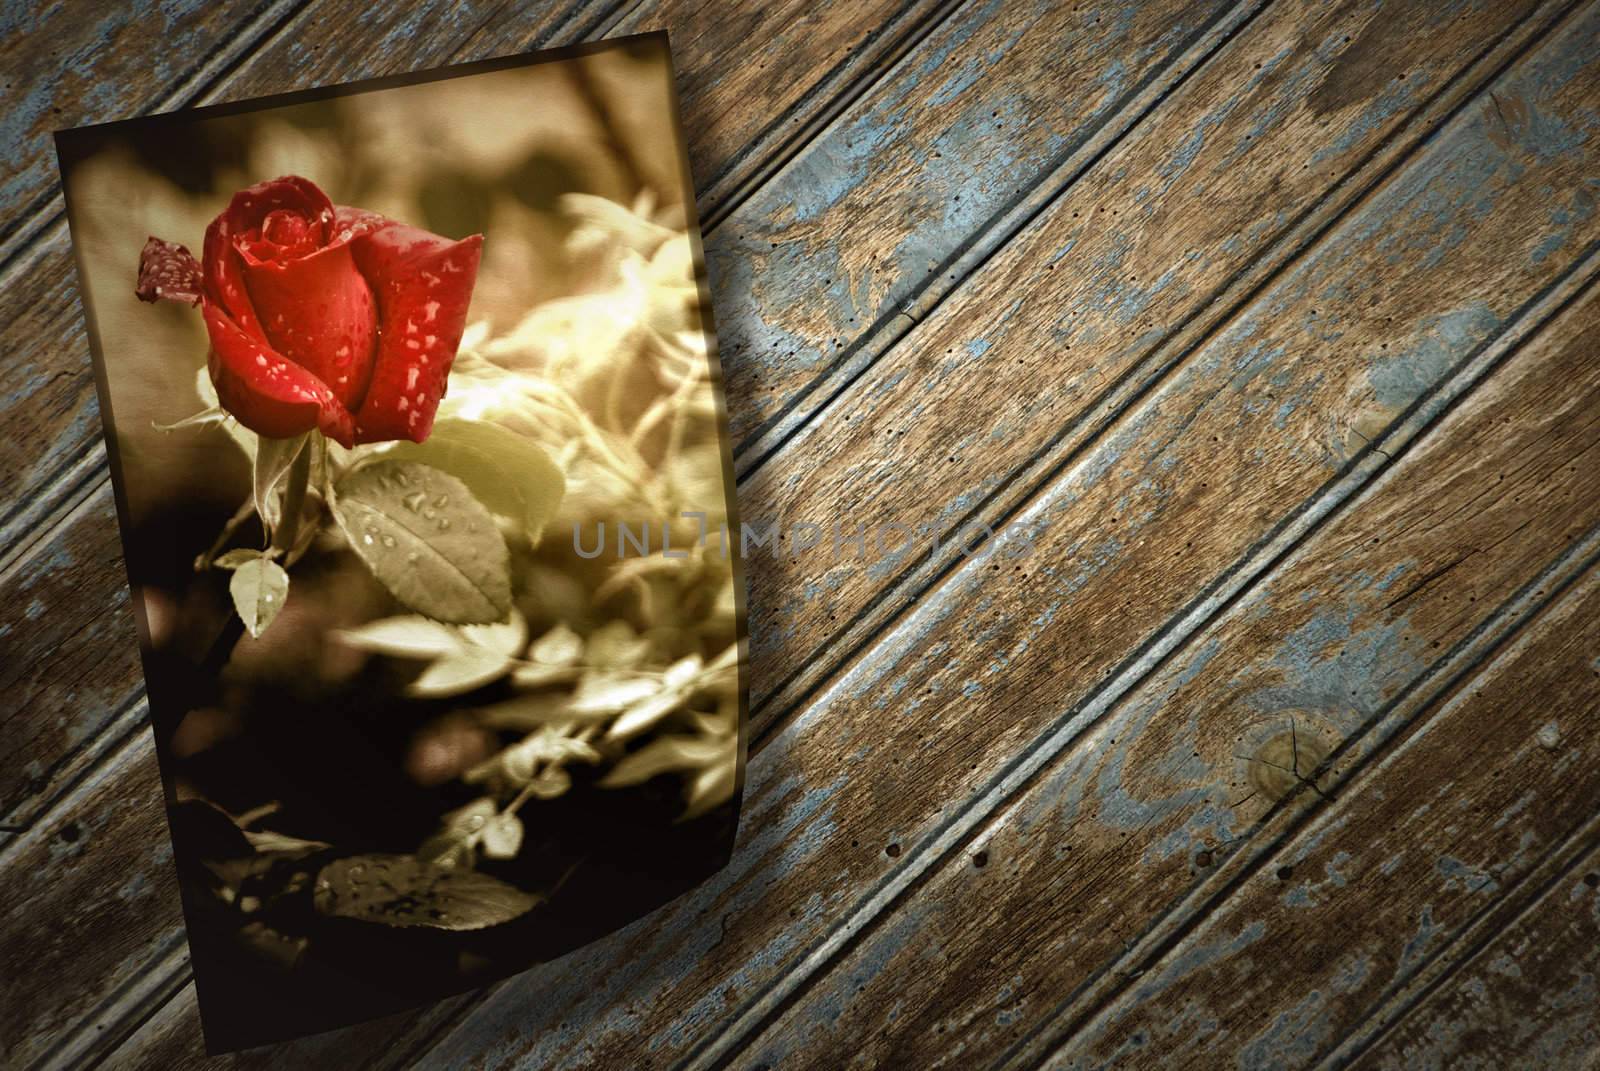 old photographs of a rosebud on an old wood floor 